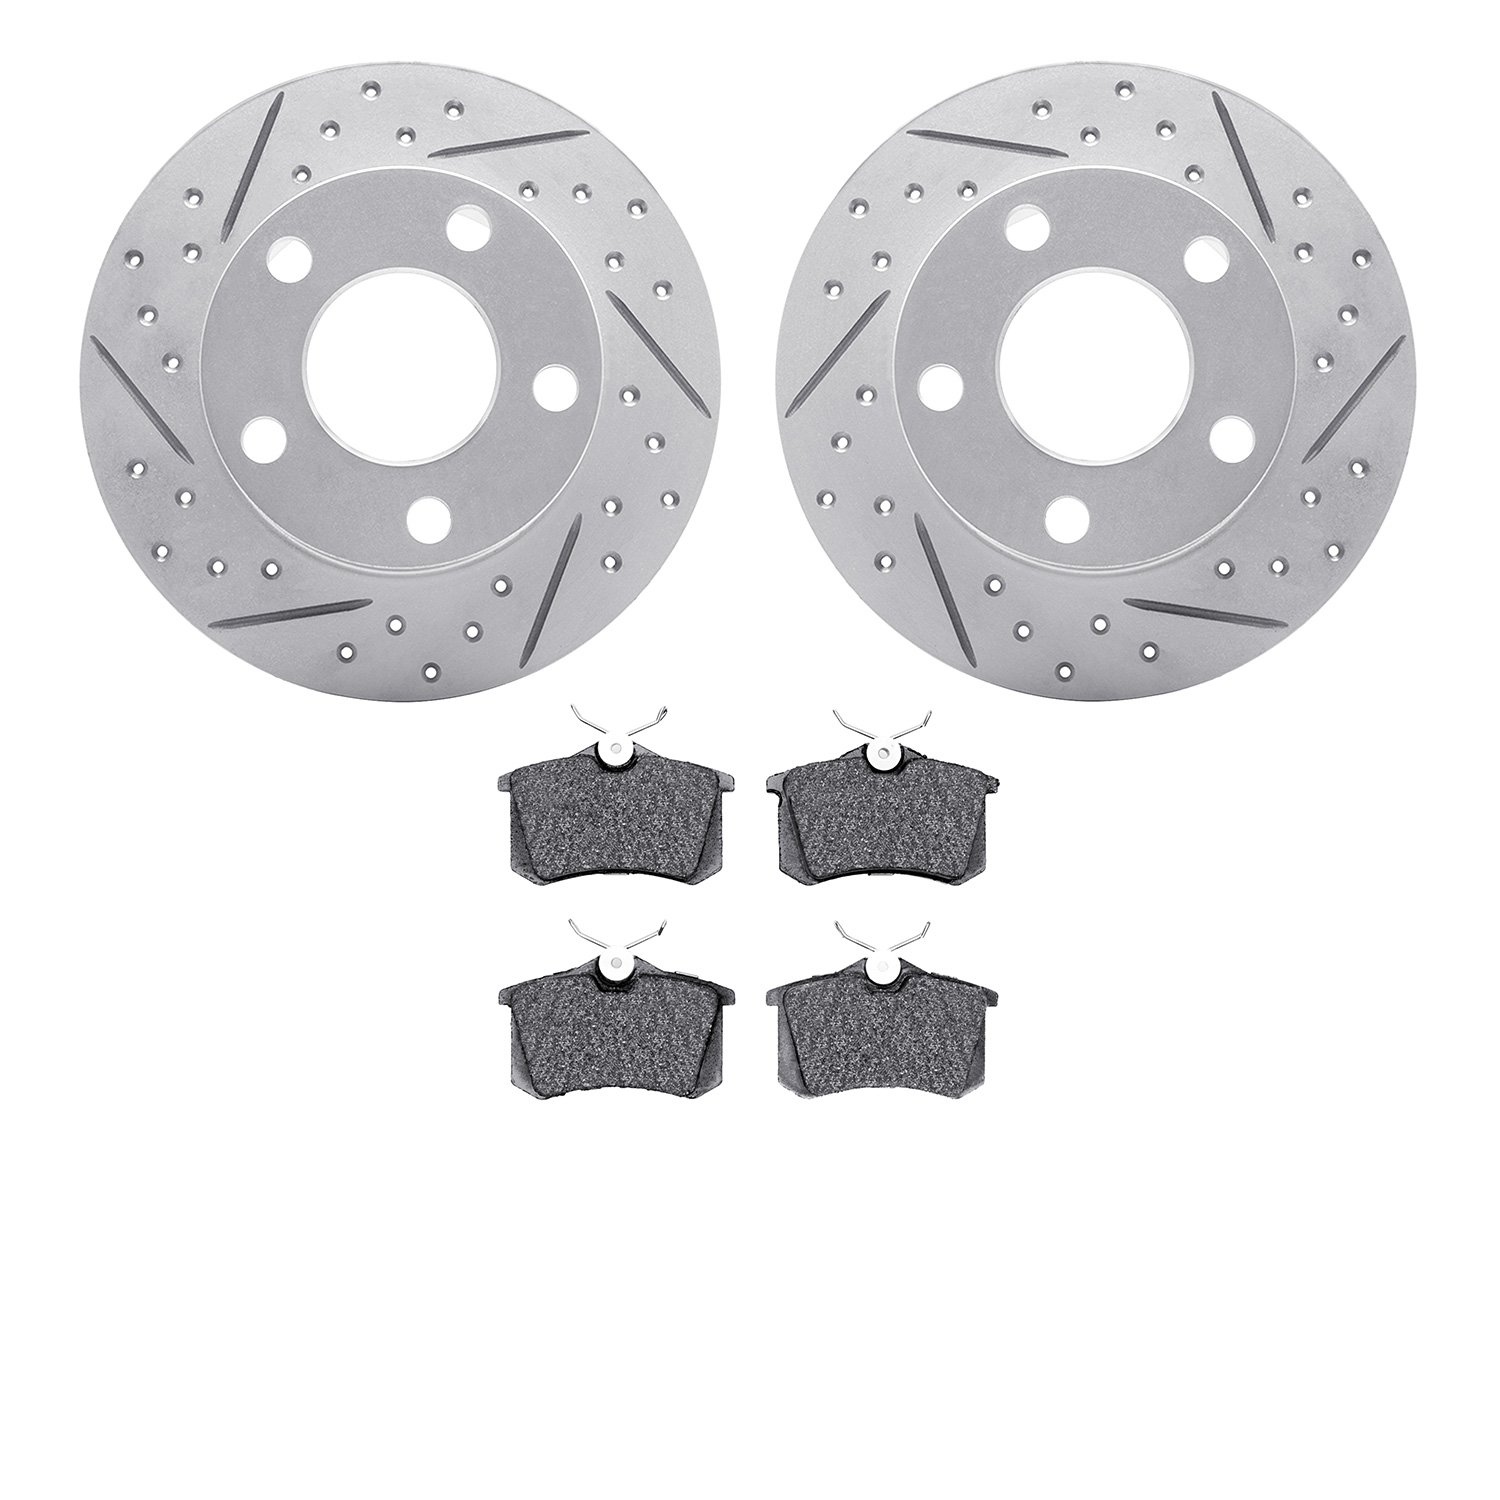 2502-74007 Geoperformance Drilled/Slotted Rotors w/5000 Advanced Brake Pads Kit, 1999-2001 Audi/Volkswagen, Position: Rear